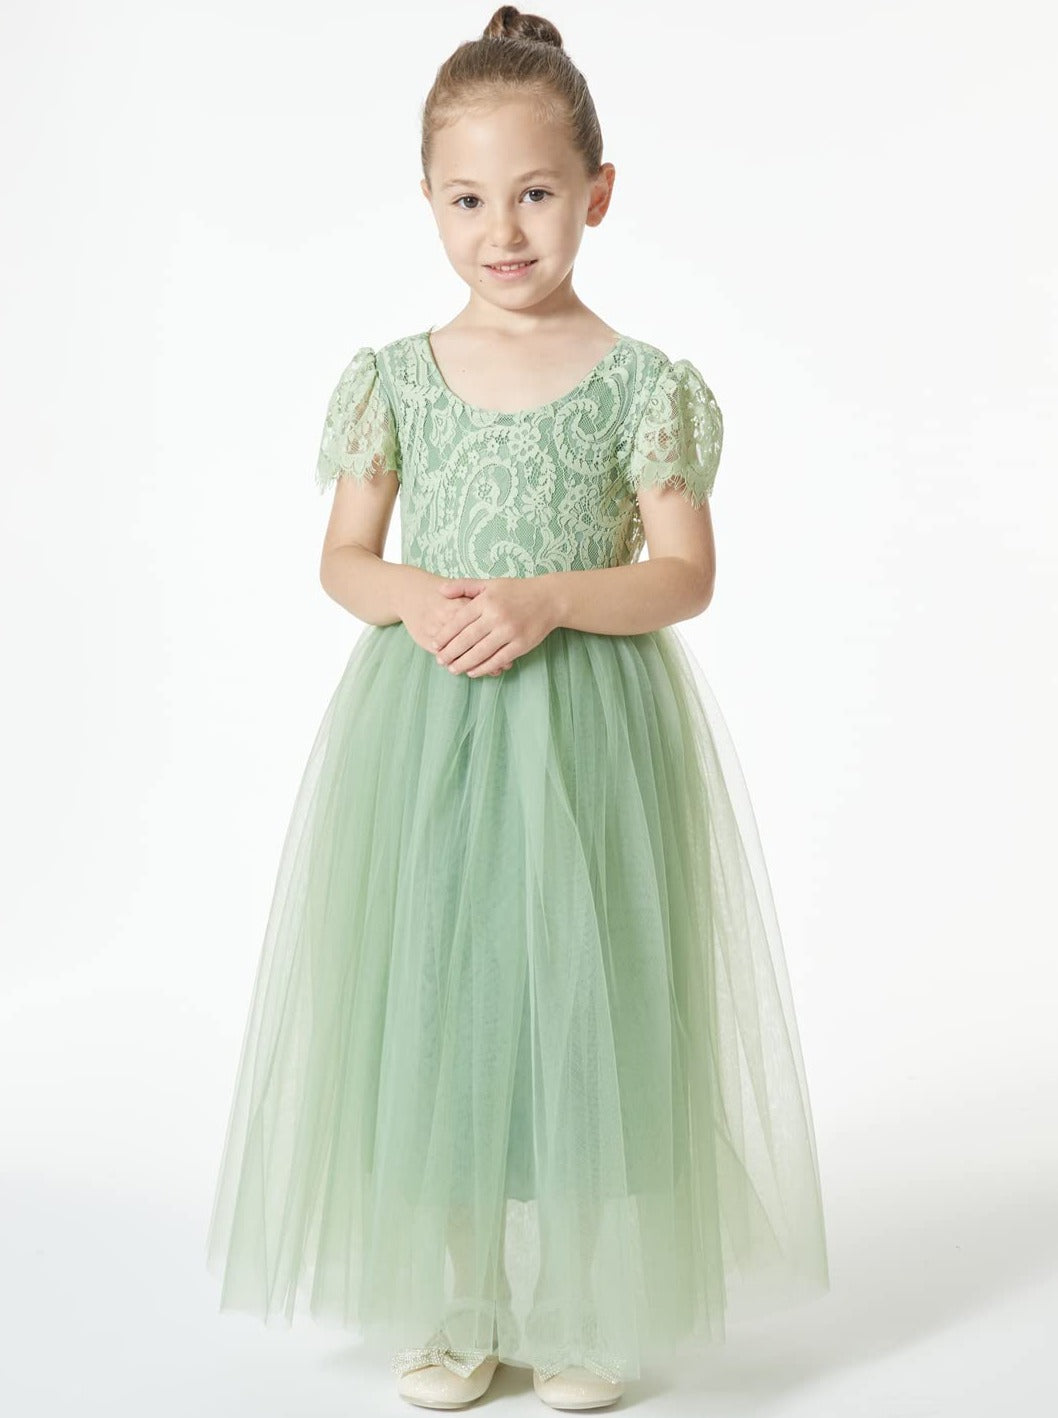 Paisley Lace Flower Girl Dress in Sage